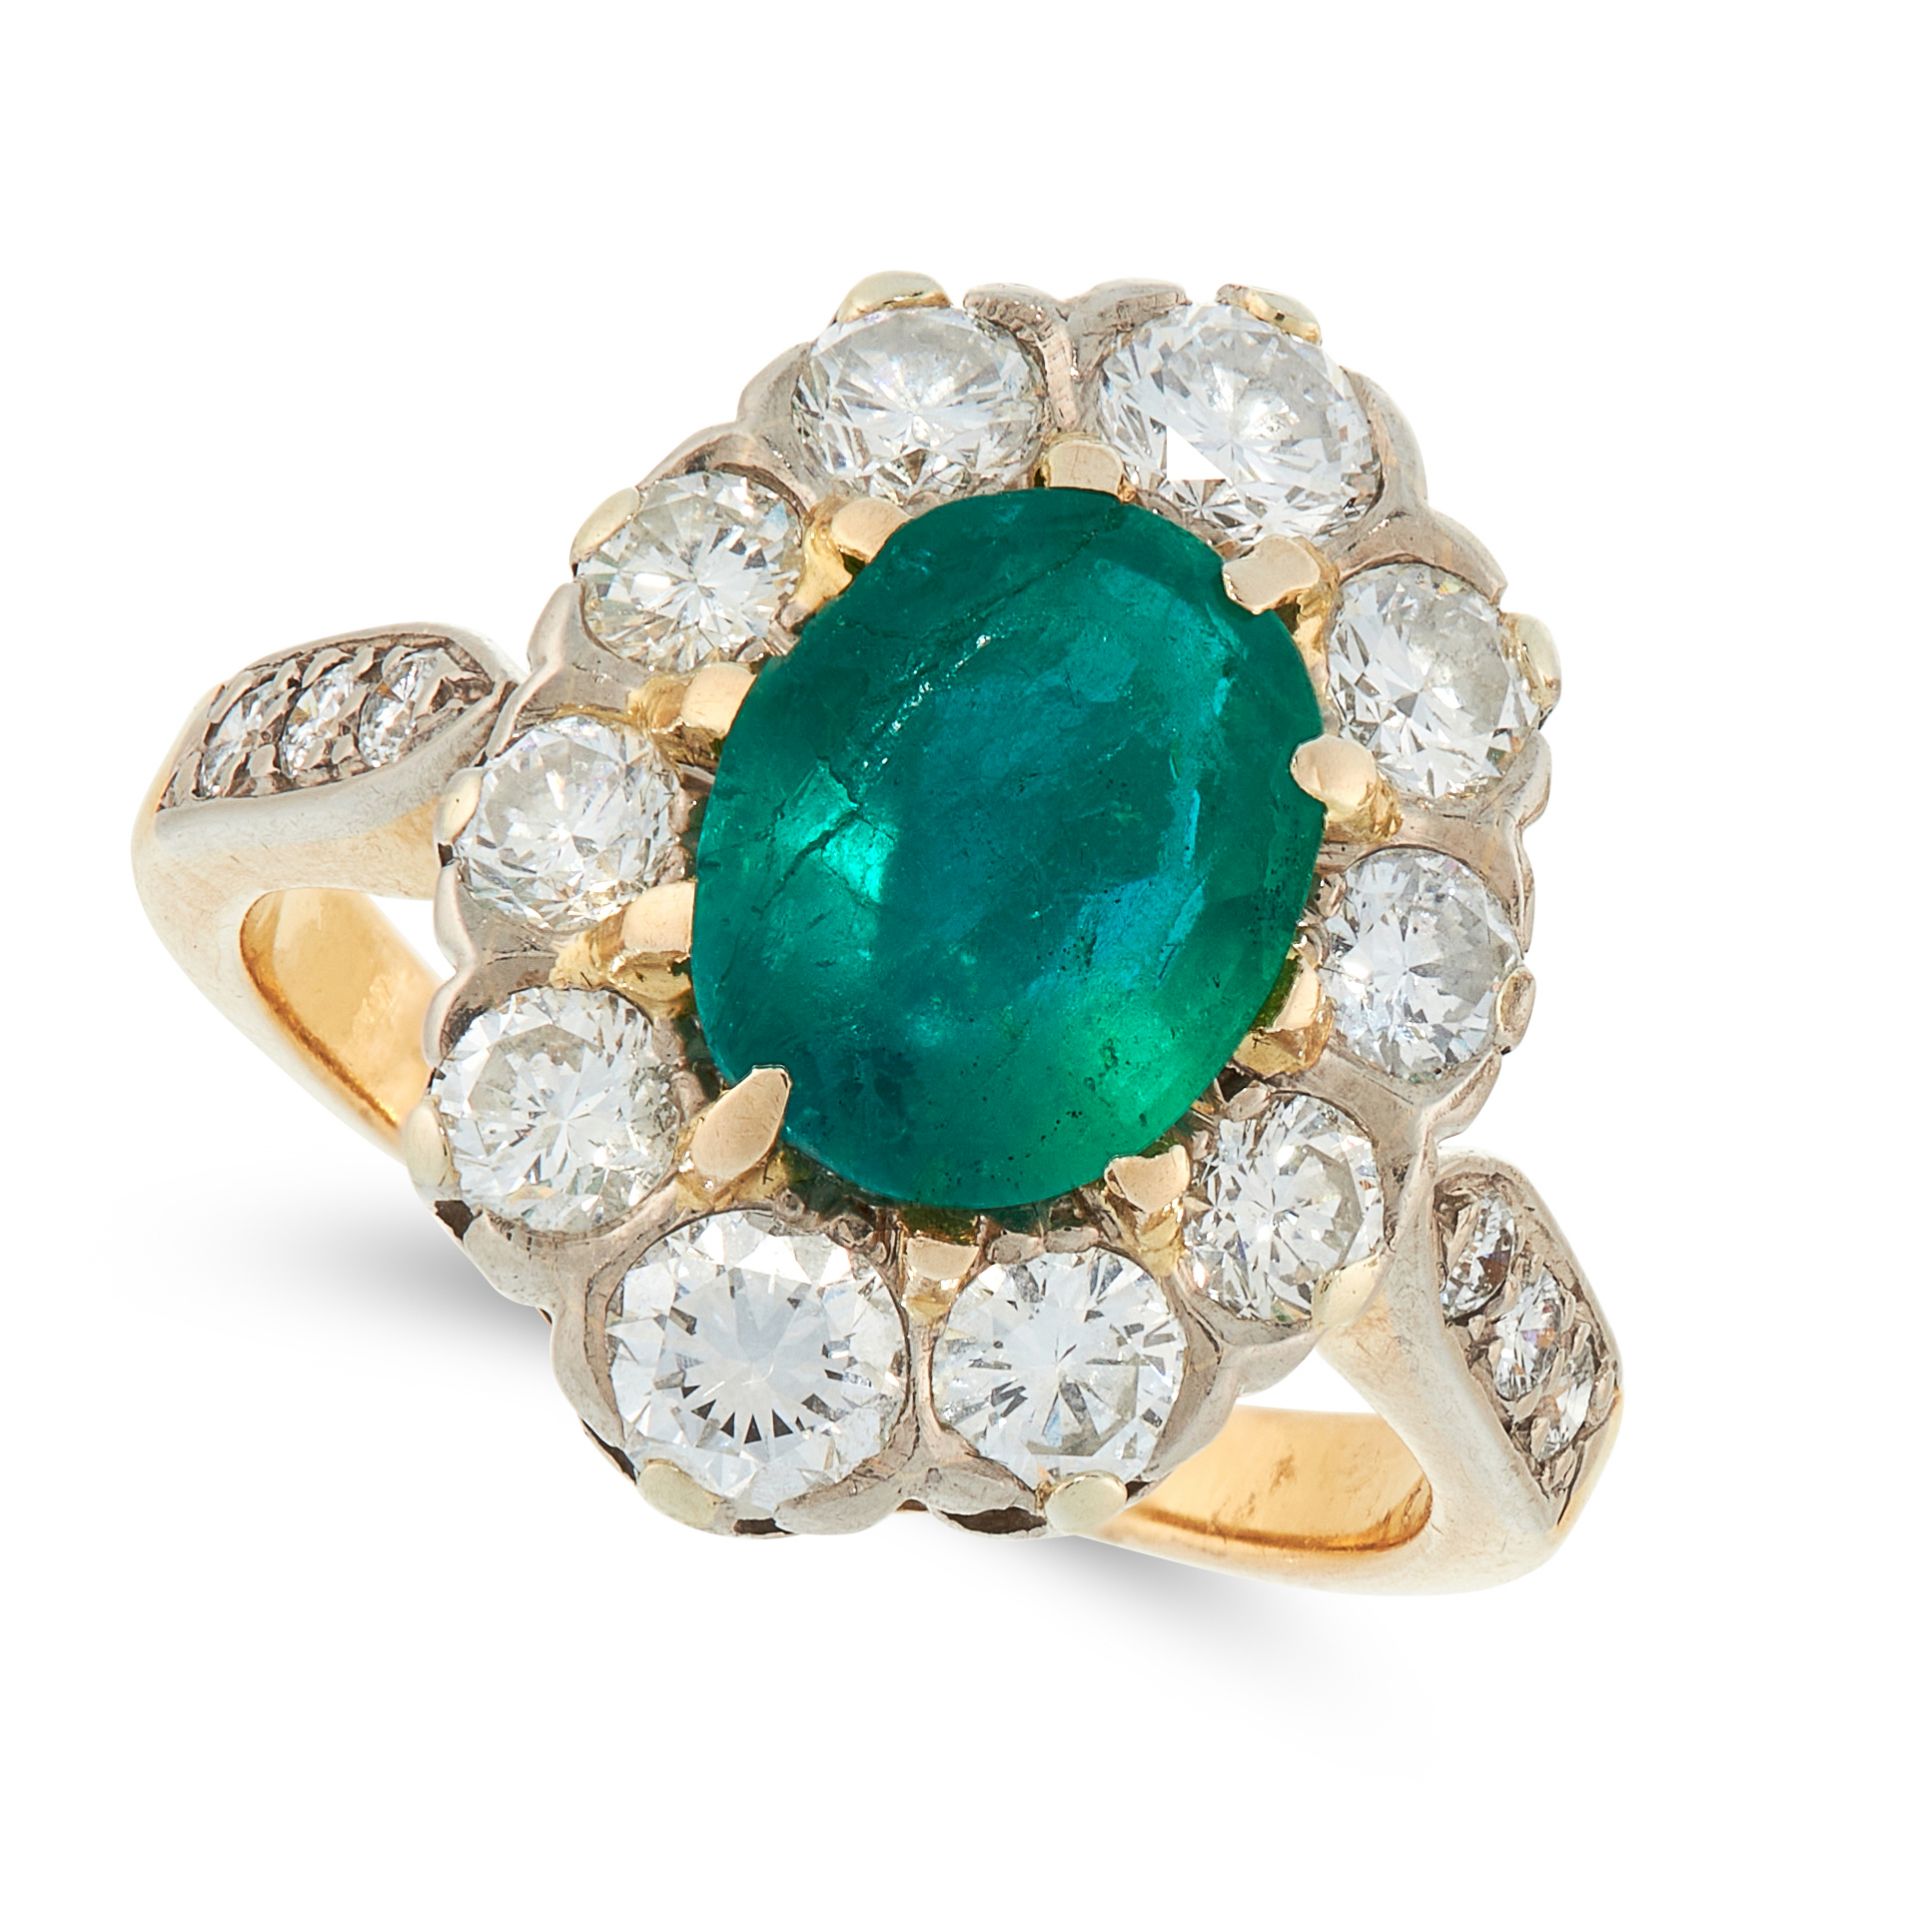 AN EMERALD AND DIAMOND DRESS RING in 18ct yellow gold, set with an oval cut emerald of 1.48 carats